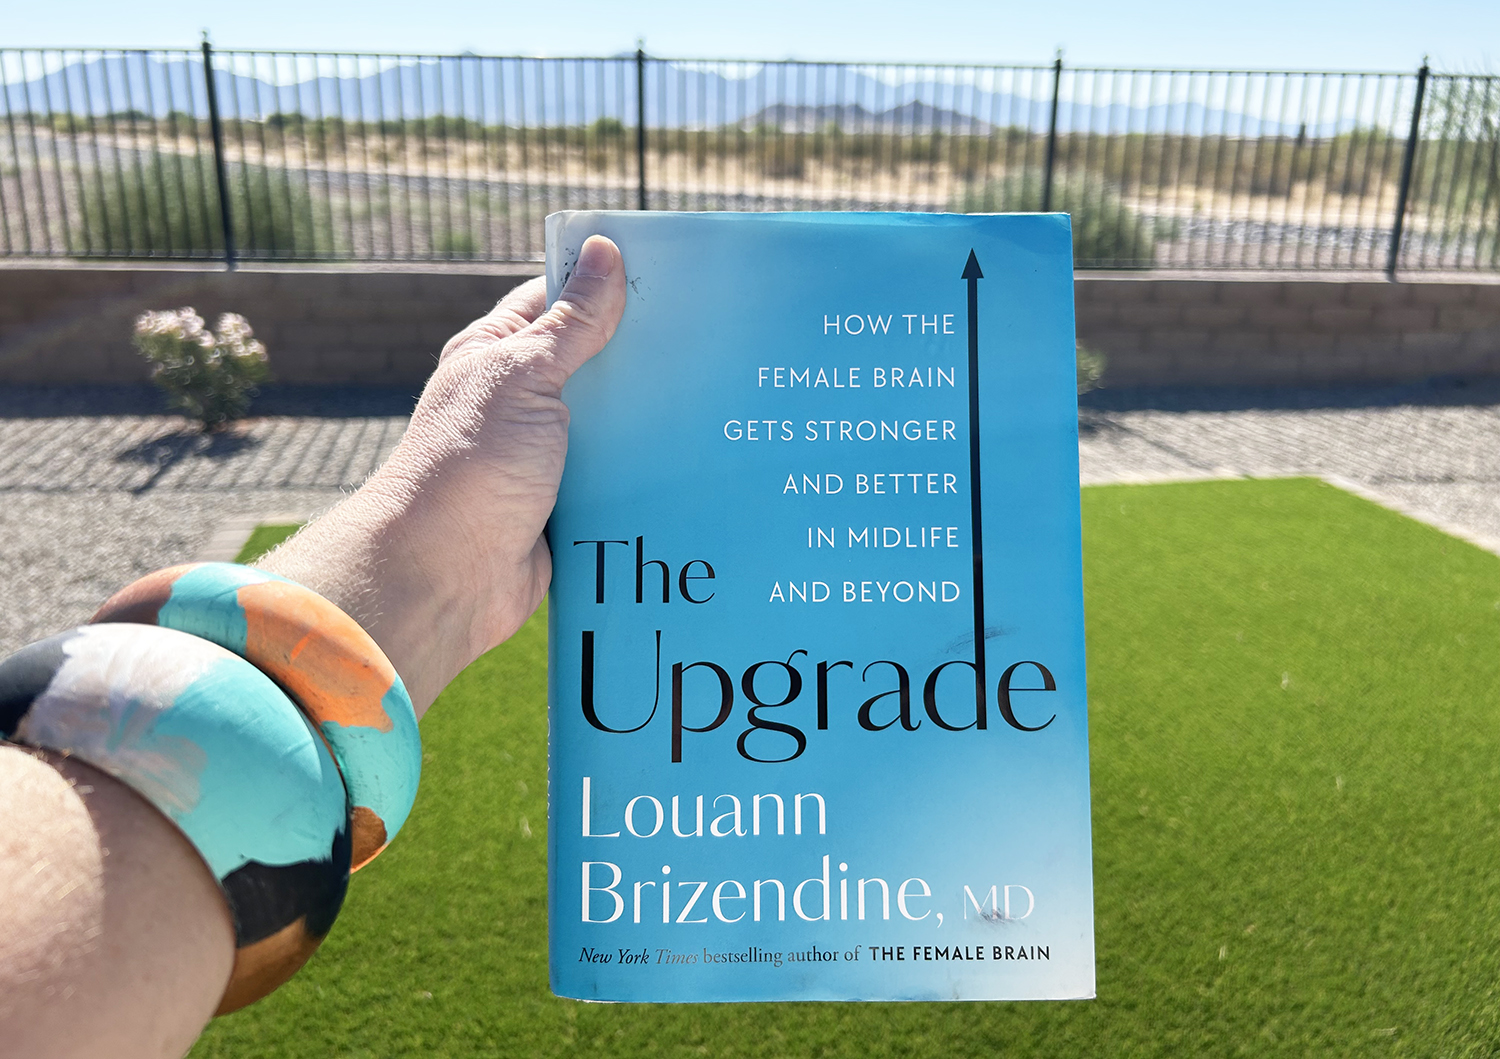 The Upgrade by Louann Brizendine MD book cover